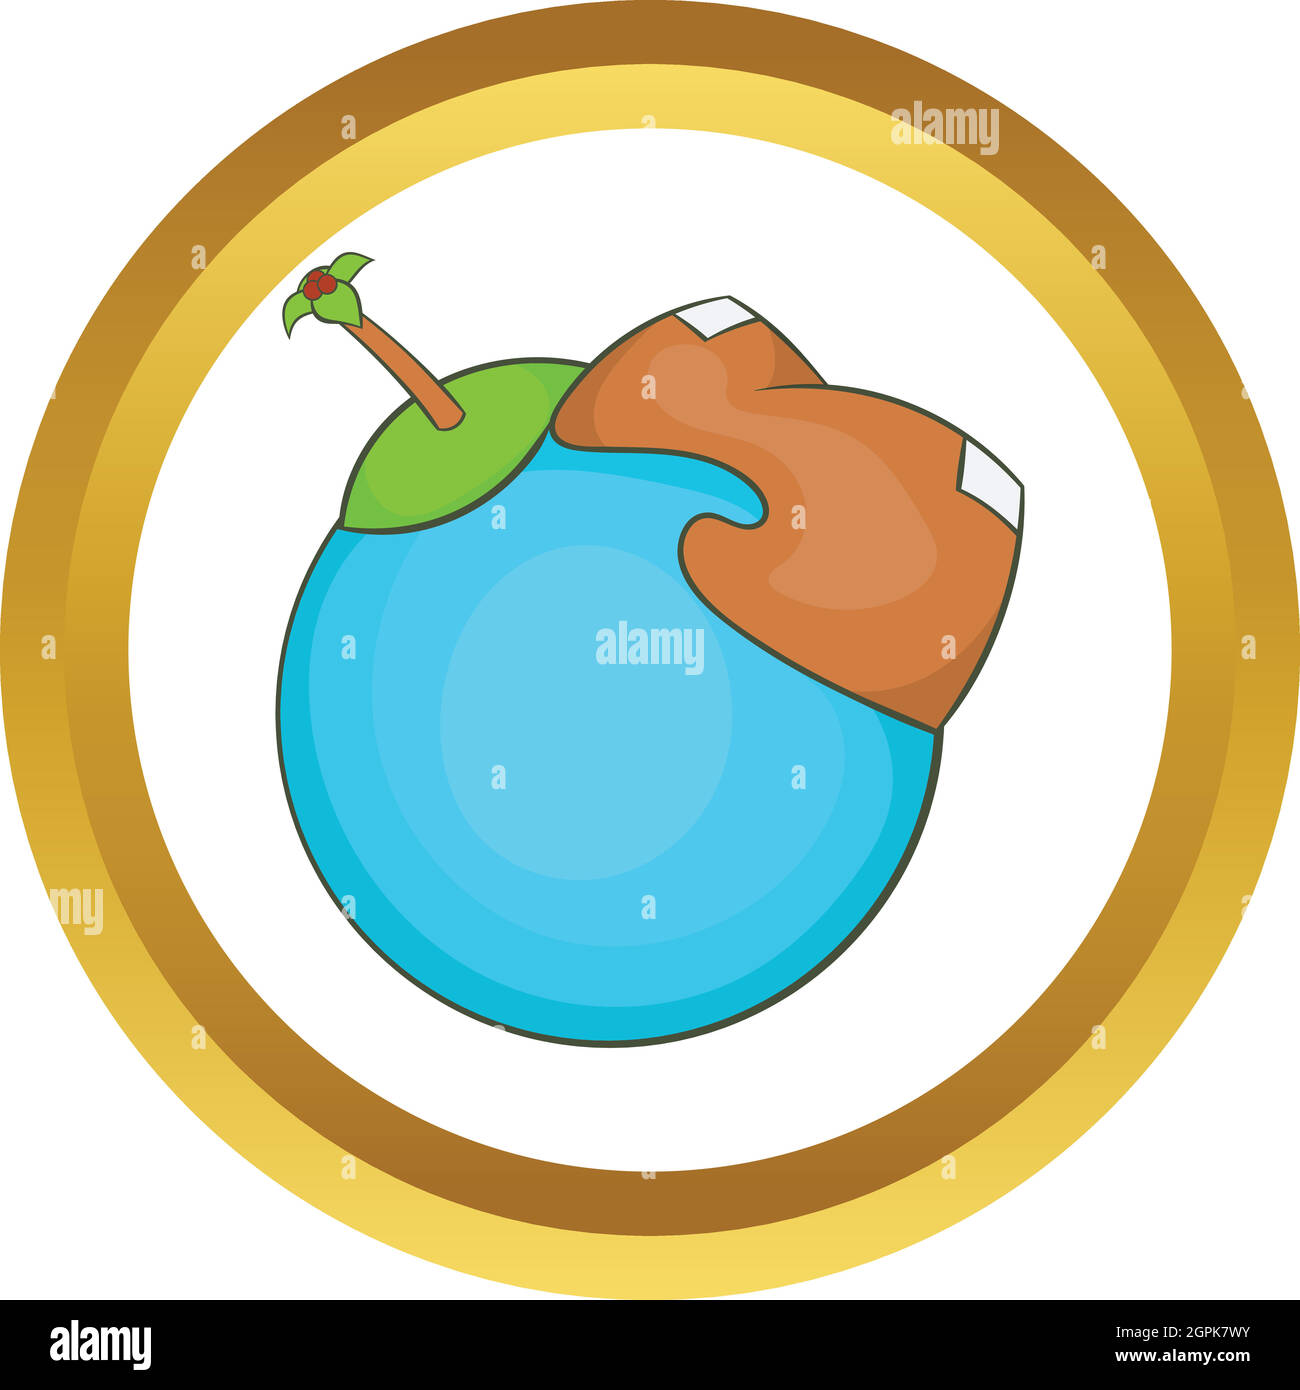 Globe with american continent vector icon Stock Vector